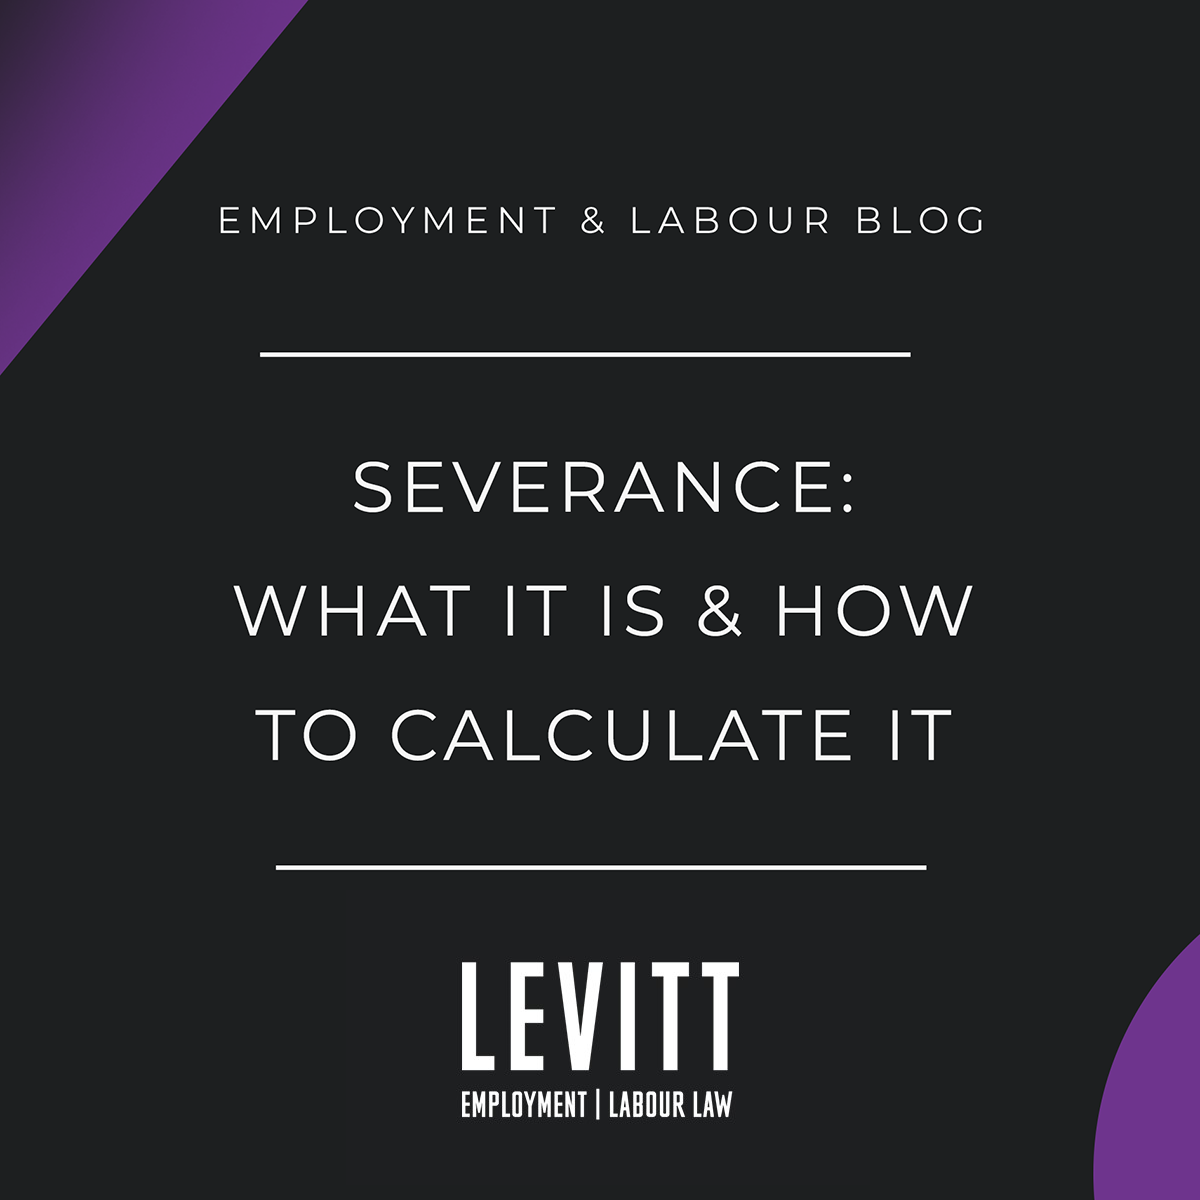 Severance: What It Is & How to Calculate It - Levitt Sheikh